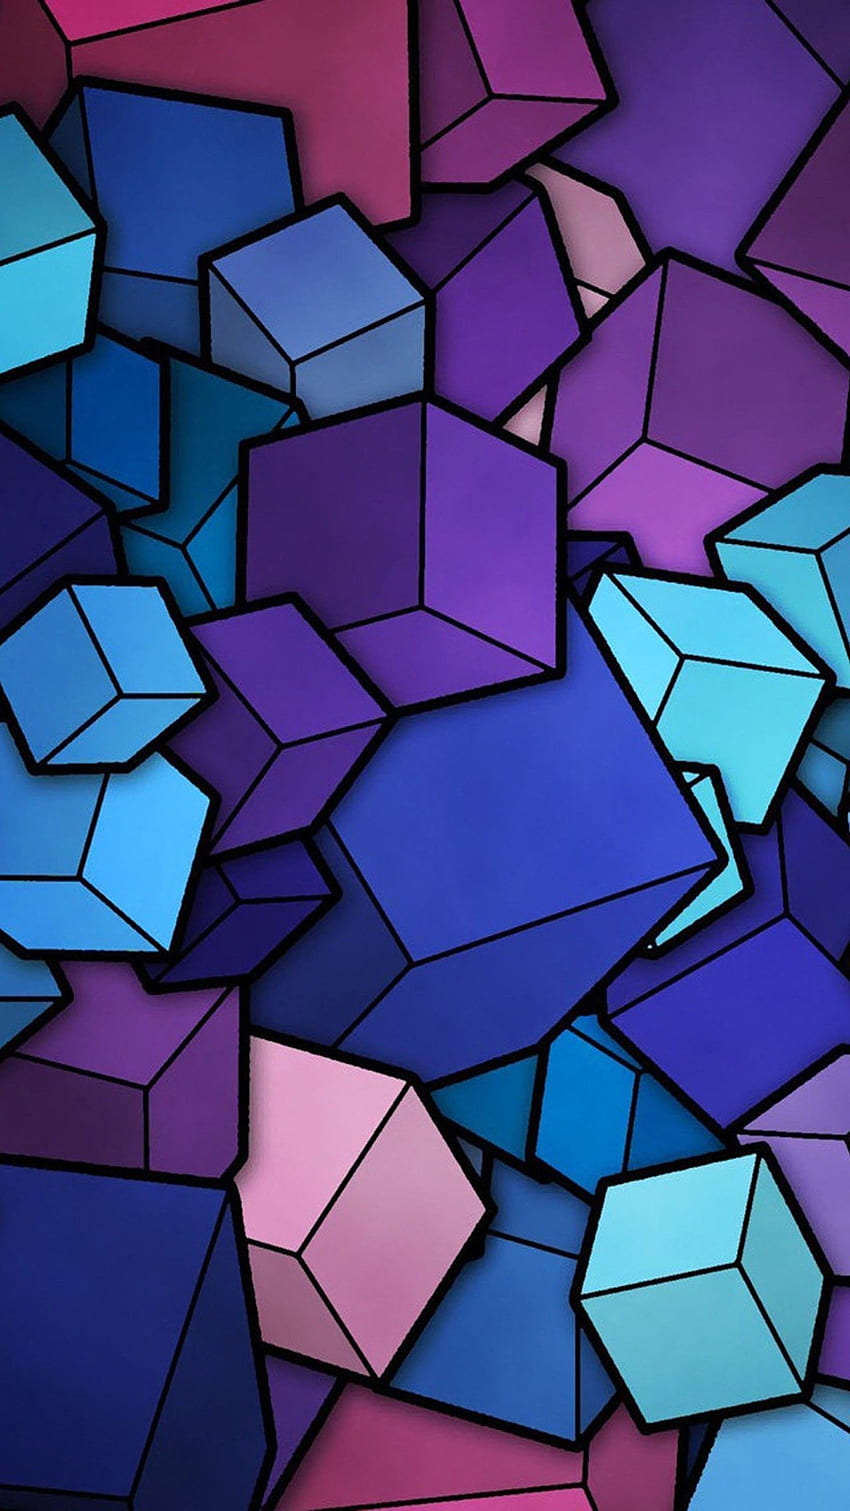 Abstract Cubes Blue Purple Galaxy S6, LG G4, HTC One M9. Cool for phones, Abstract iphone , Samsung HD phone wallpaper